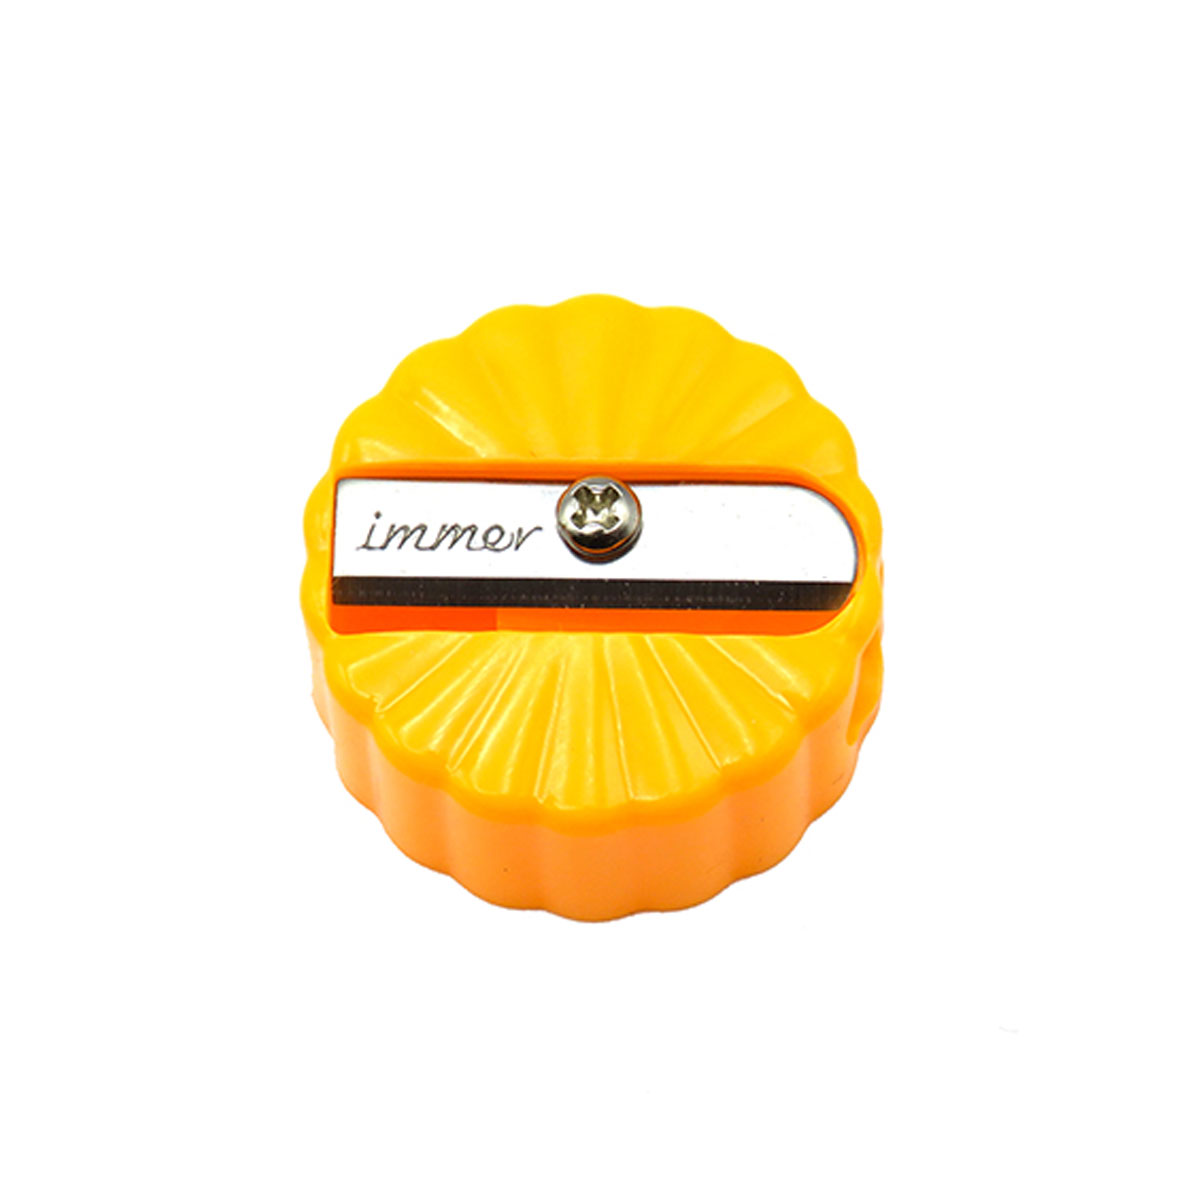 Immar rounded Pencil Sharpener-02